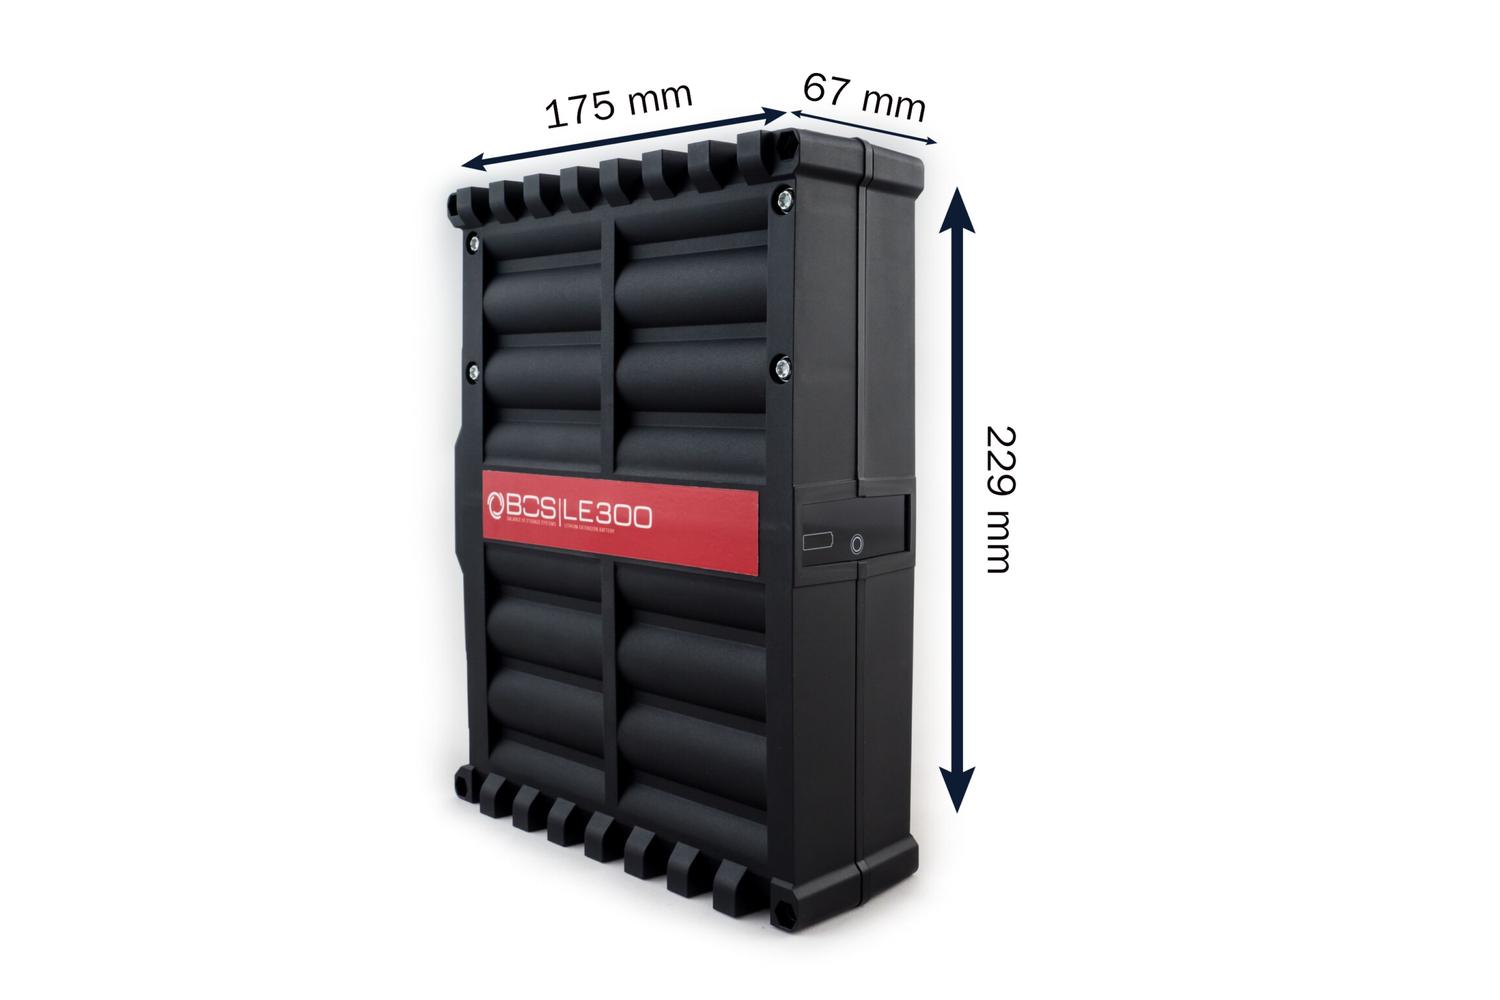 BOS LE 300 Smart Battery System 25.6A